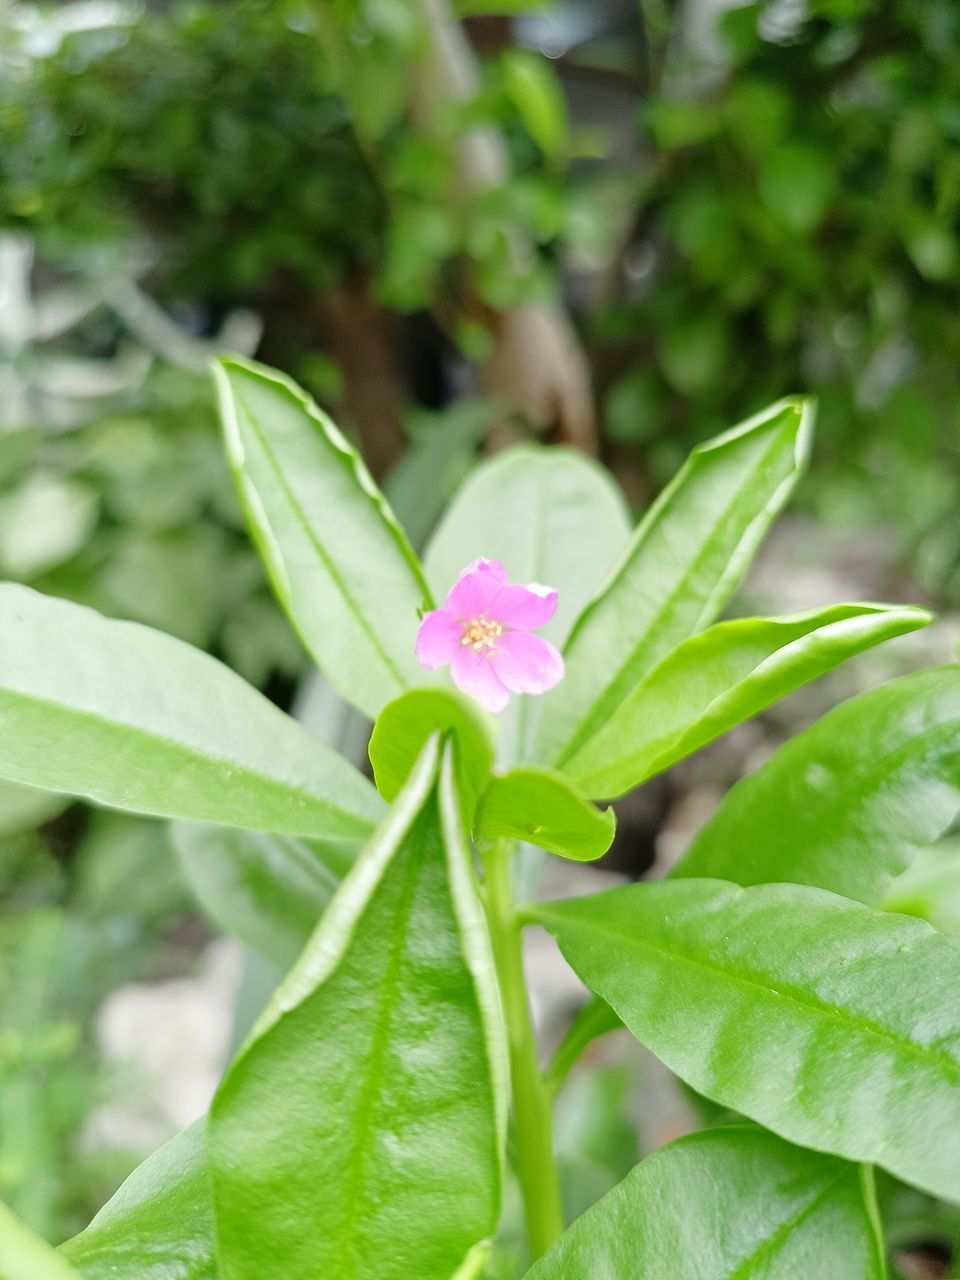 plant, leaf, plant part, flower, flowering plant, green, beauty in nature, nature, freshness, growth, close-up, no people, petal, pink, outdoors, fragility, food and drink, food, flower head, day, summer, springtime, inflorescence, wildflower, environment, focus on foreground